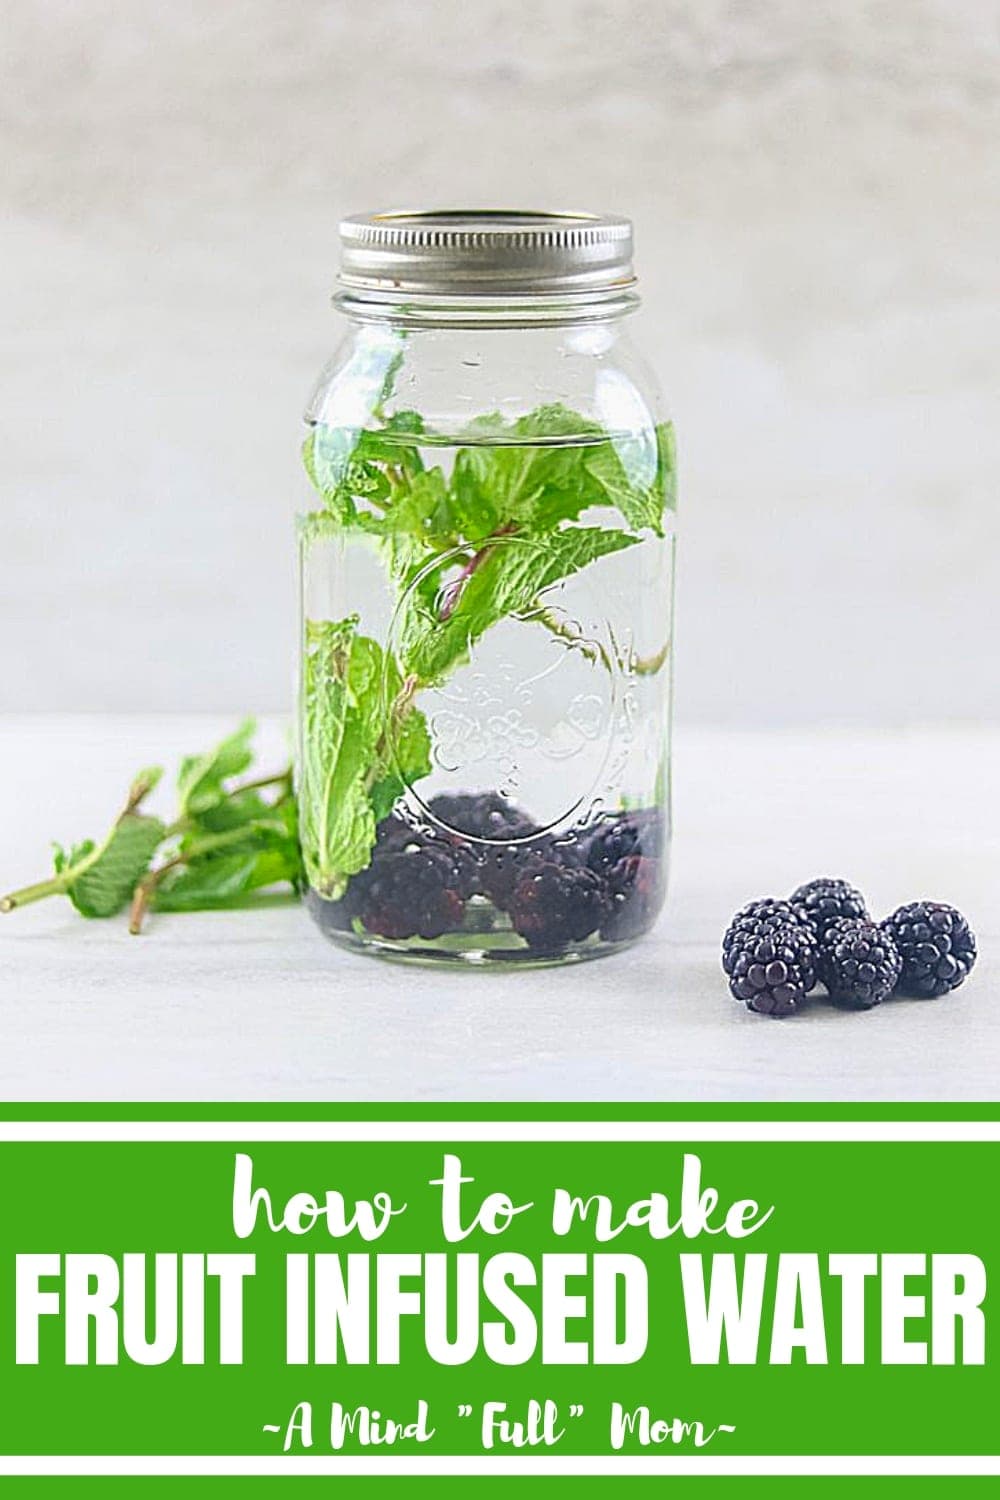 Easily make your own homemade infused waters with these 4 delicious combinations of fruits.  These simple infused water recipes will make drinking your daily water quota a pleasure instead of a chore. Recipe included for Blackberry Mint, Strawberry Cucumber, Orange Blueberry, and Lemon Lime Infused Water.